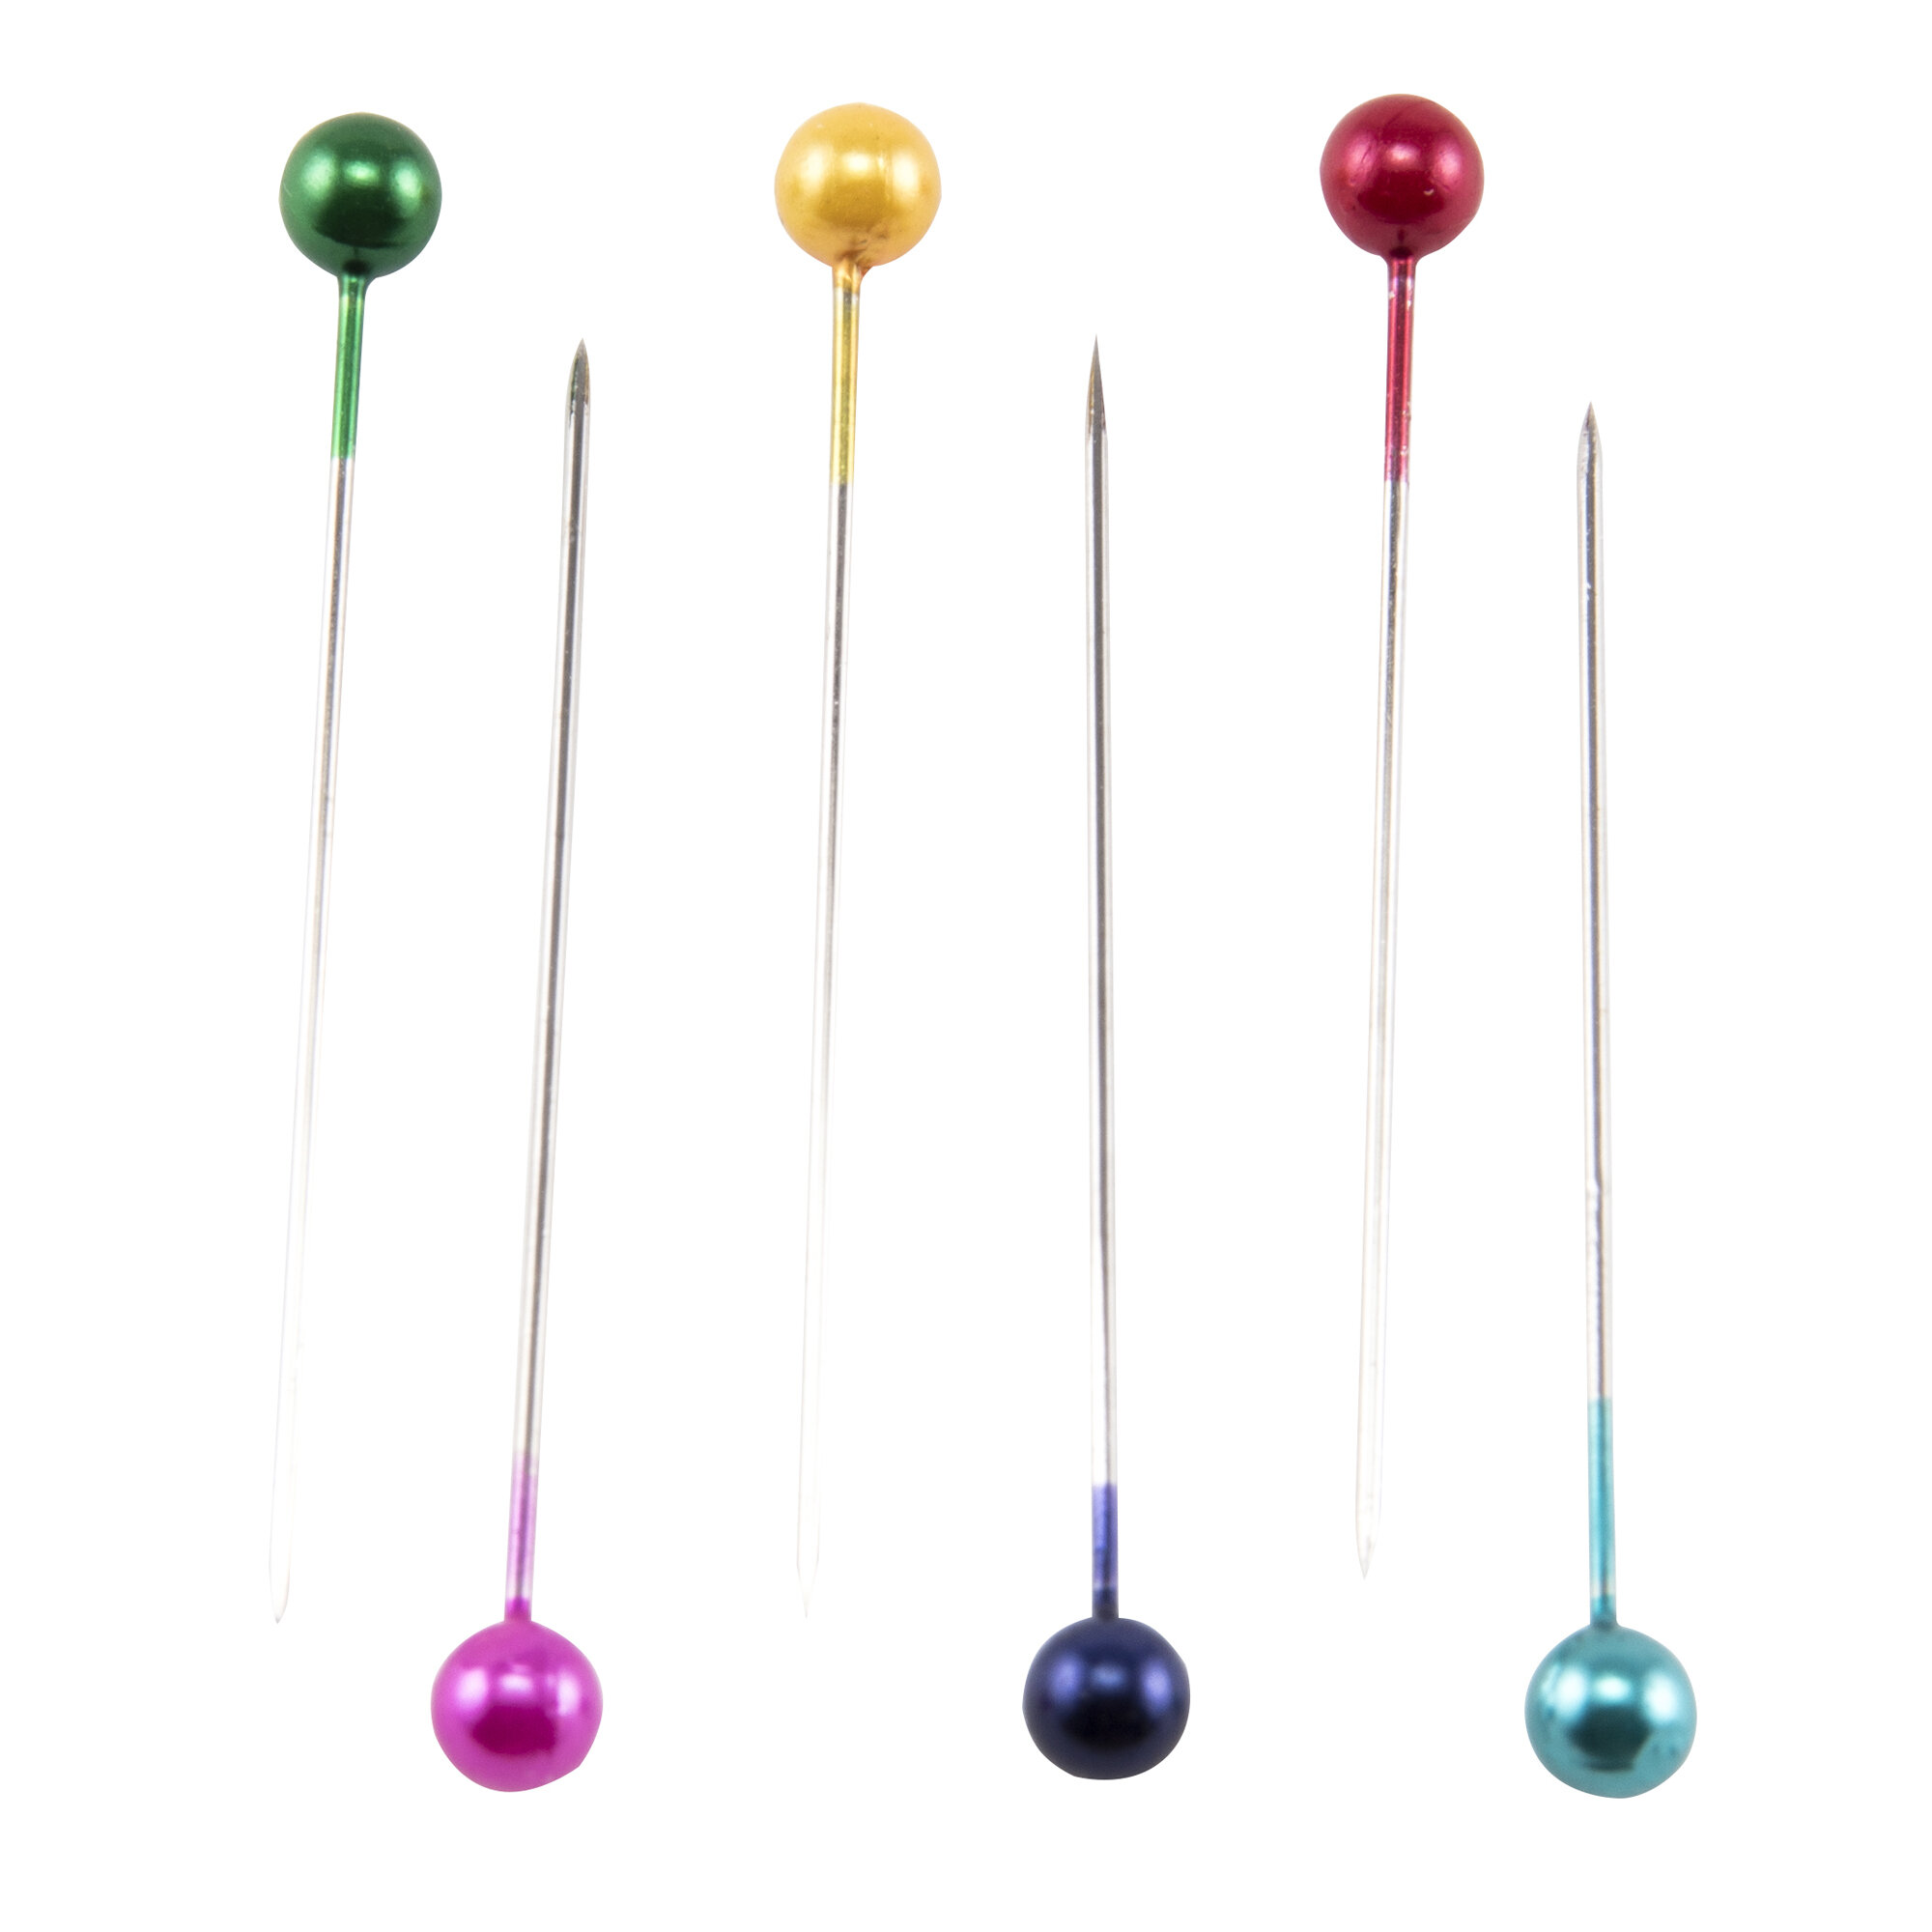 Singer Pearlized Straight Pins Size 20 150/Pkg